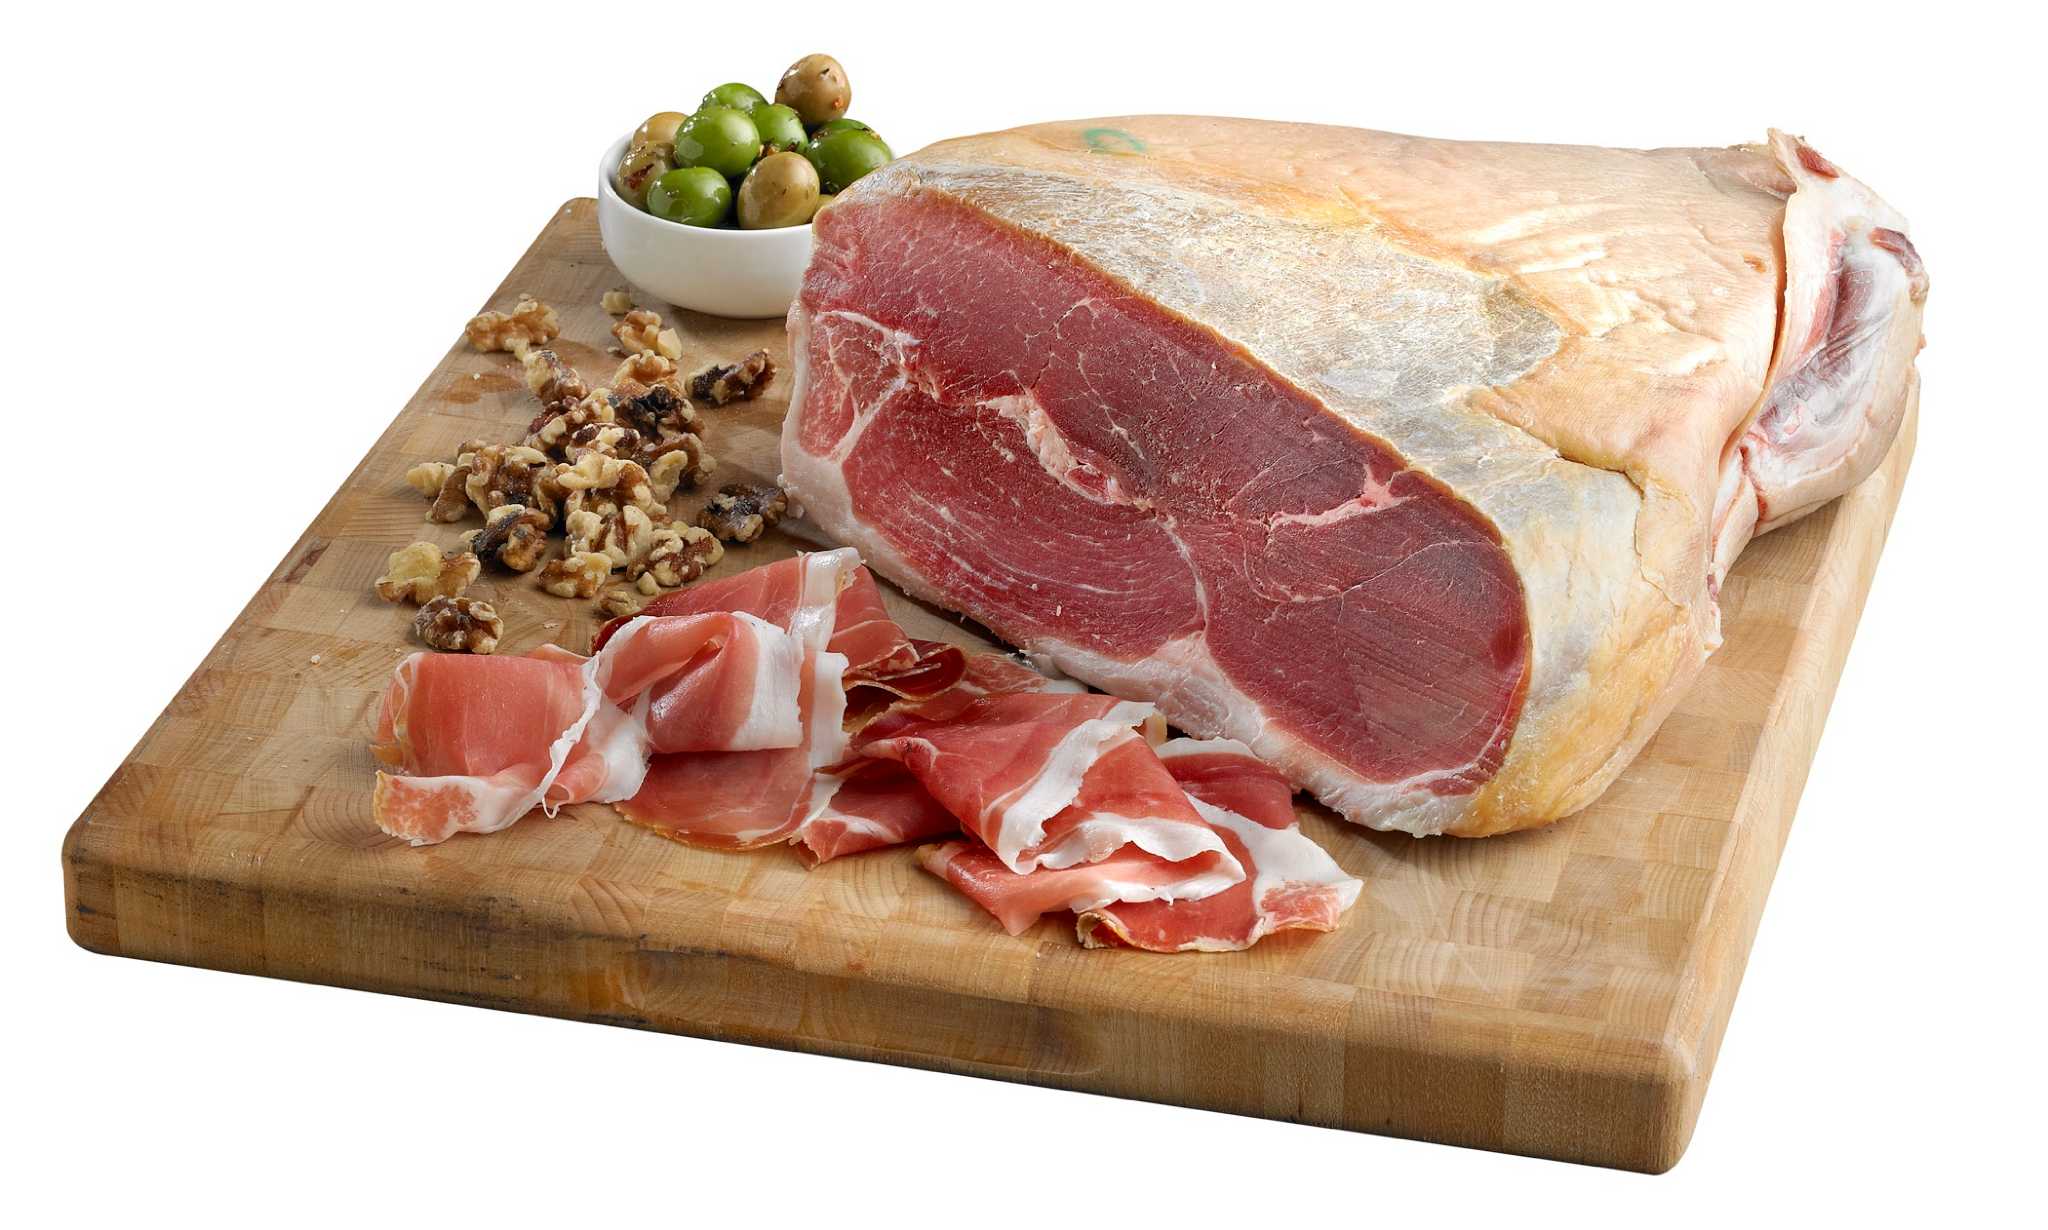 Jambon de Bayonne - Bayonne Ham - Has Arrived in the US - Frenchly